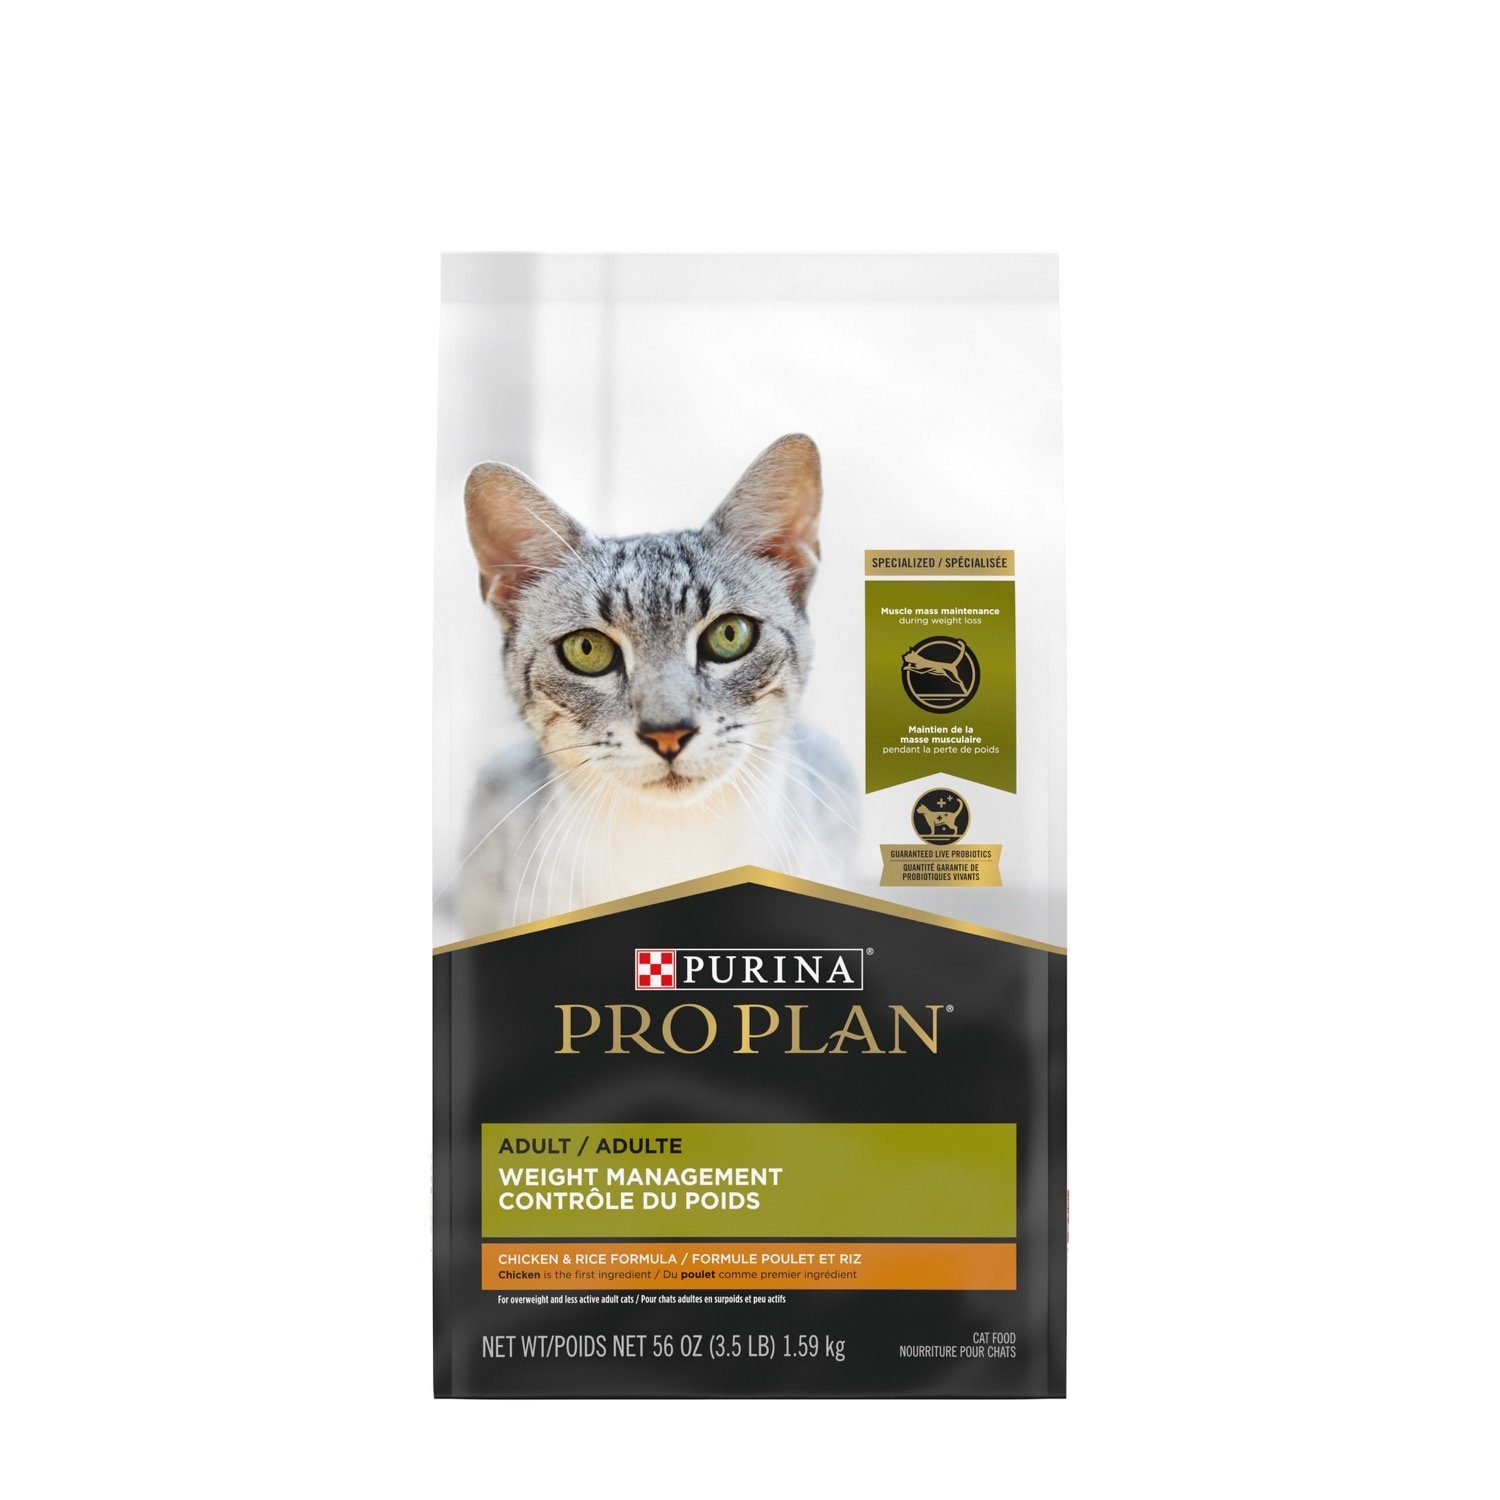 Purina Pro Plan Adult Weight Management Chicken & Rice Dry Cat Food 7.26 Kg Cat Food 7.26 Kg | PetMax Canada